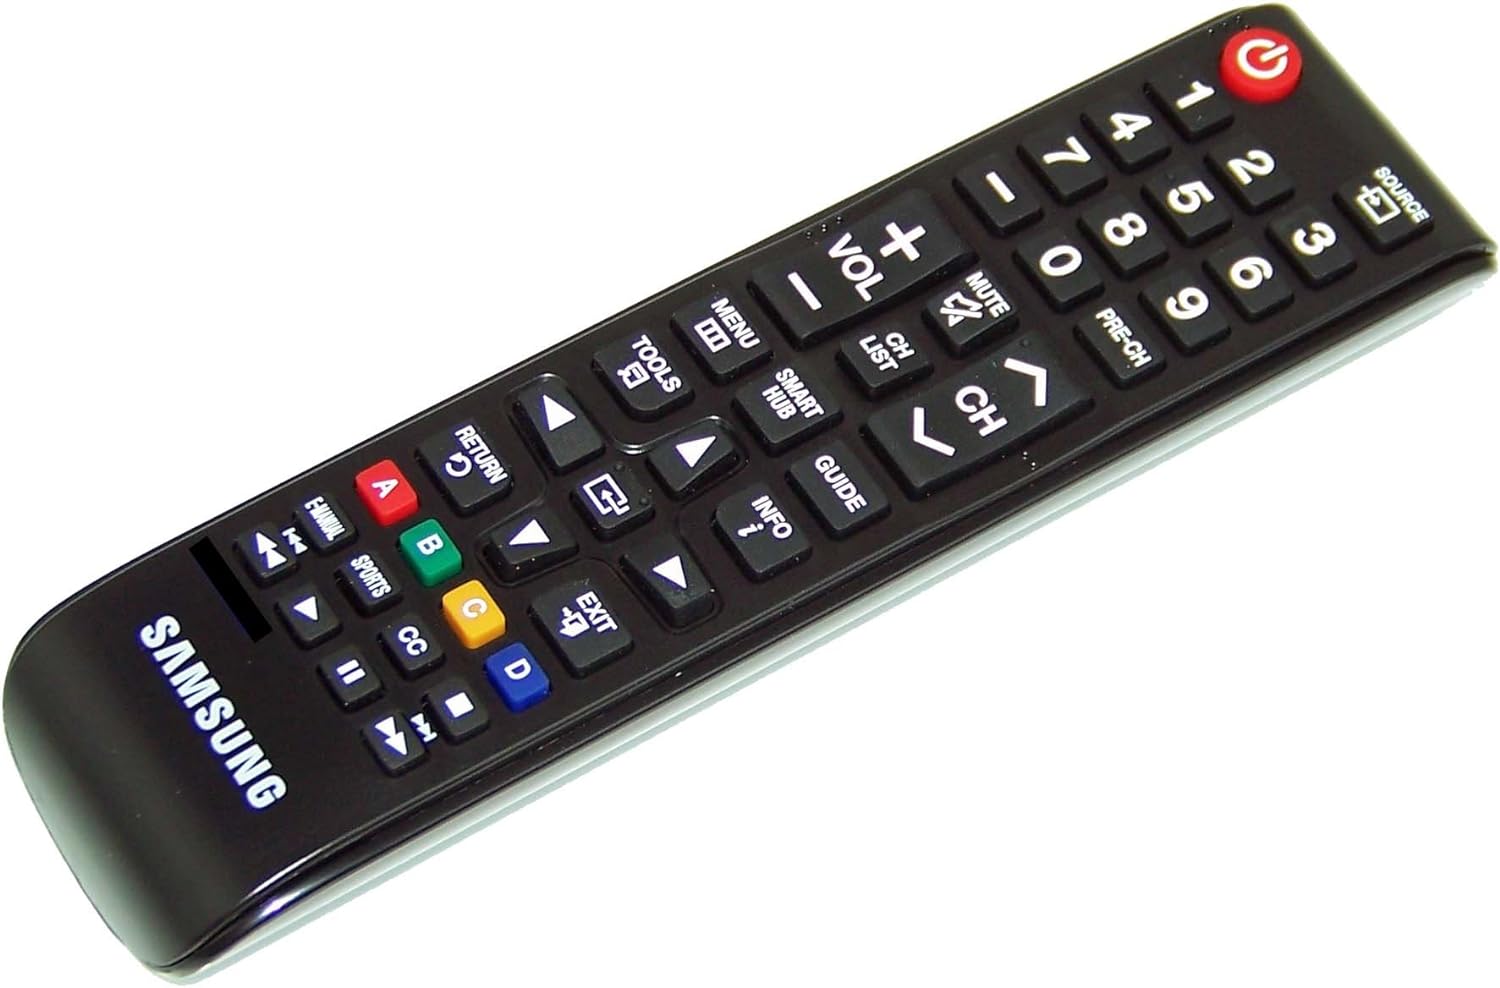 Samsung DLP TV with remote control